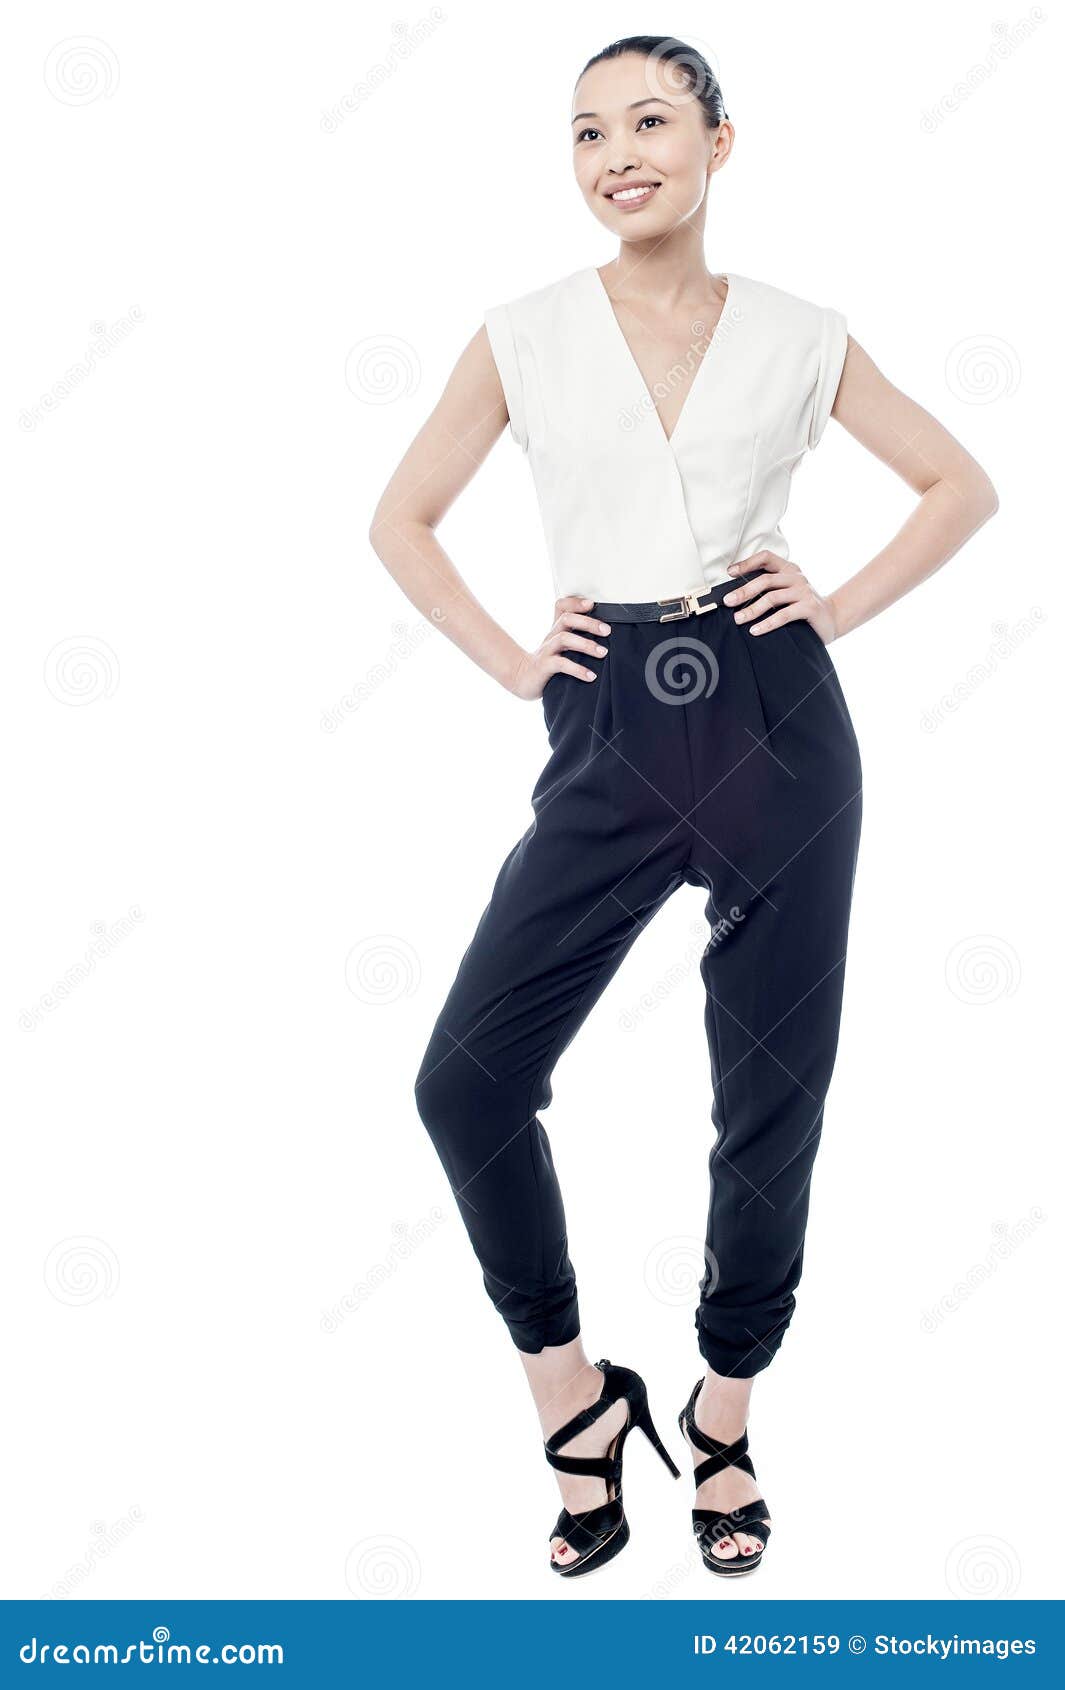 Smiling Young Woman Posing in Style Stock Image - Image of joyful ...